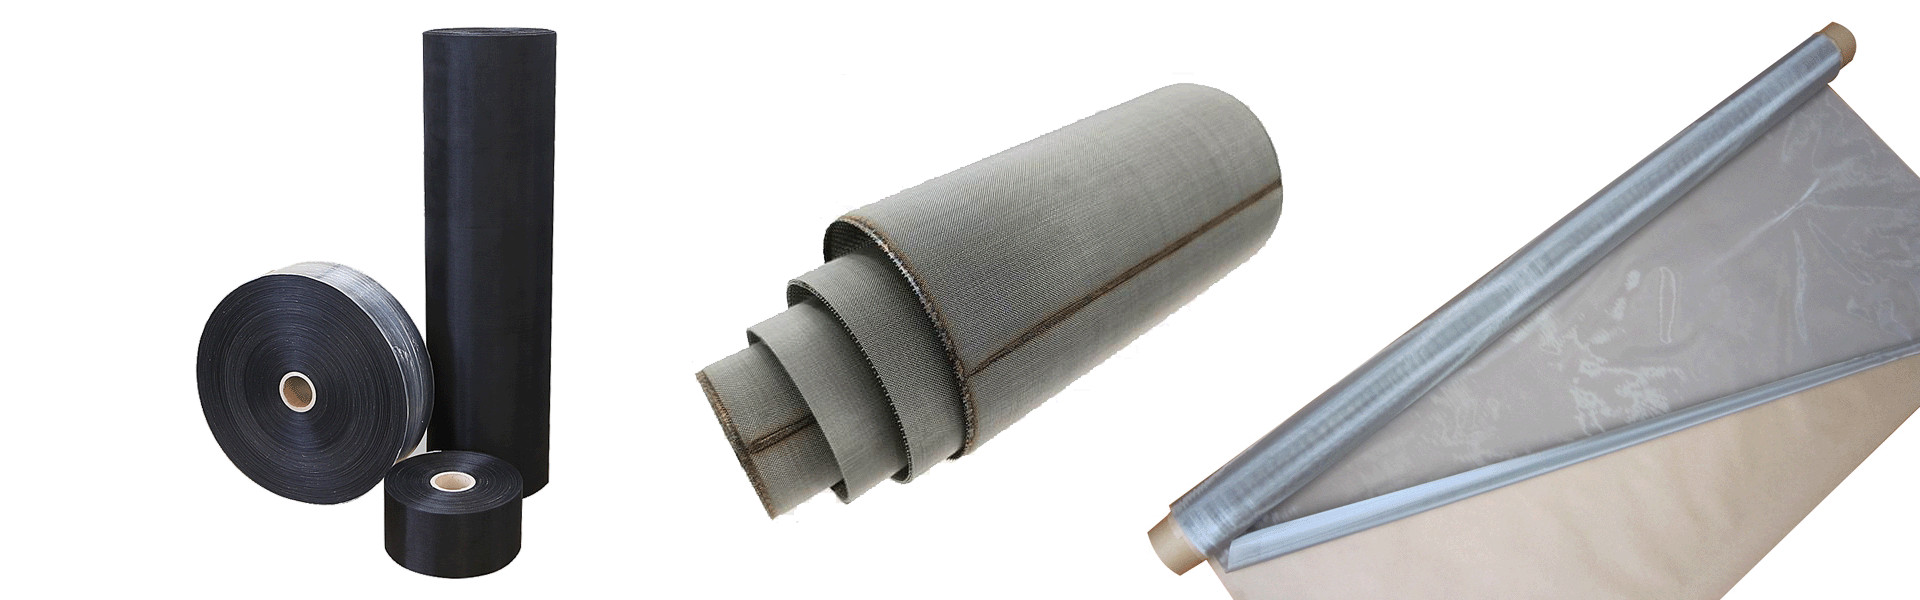 STAINLESS STEEL FILTER ACCESSORIES